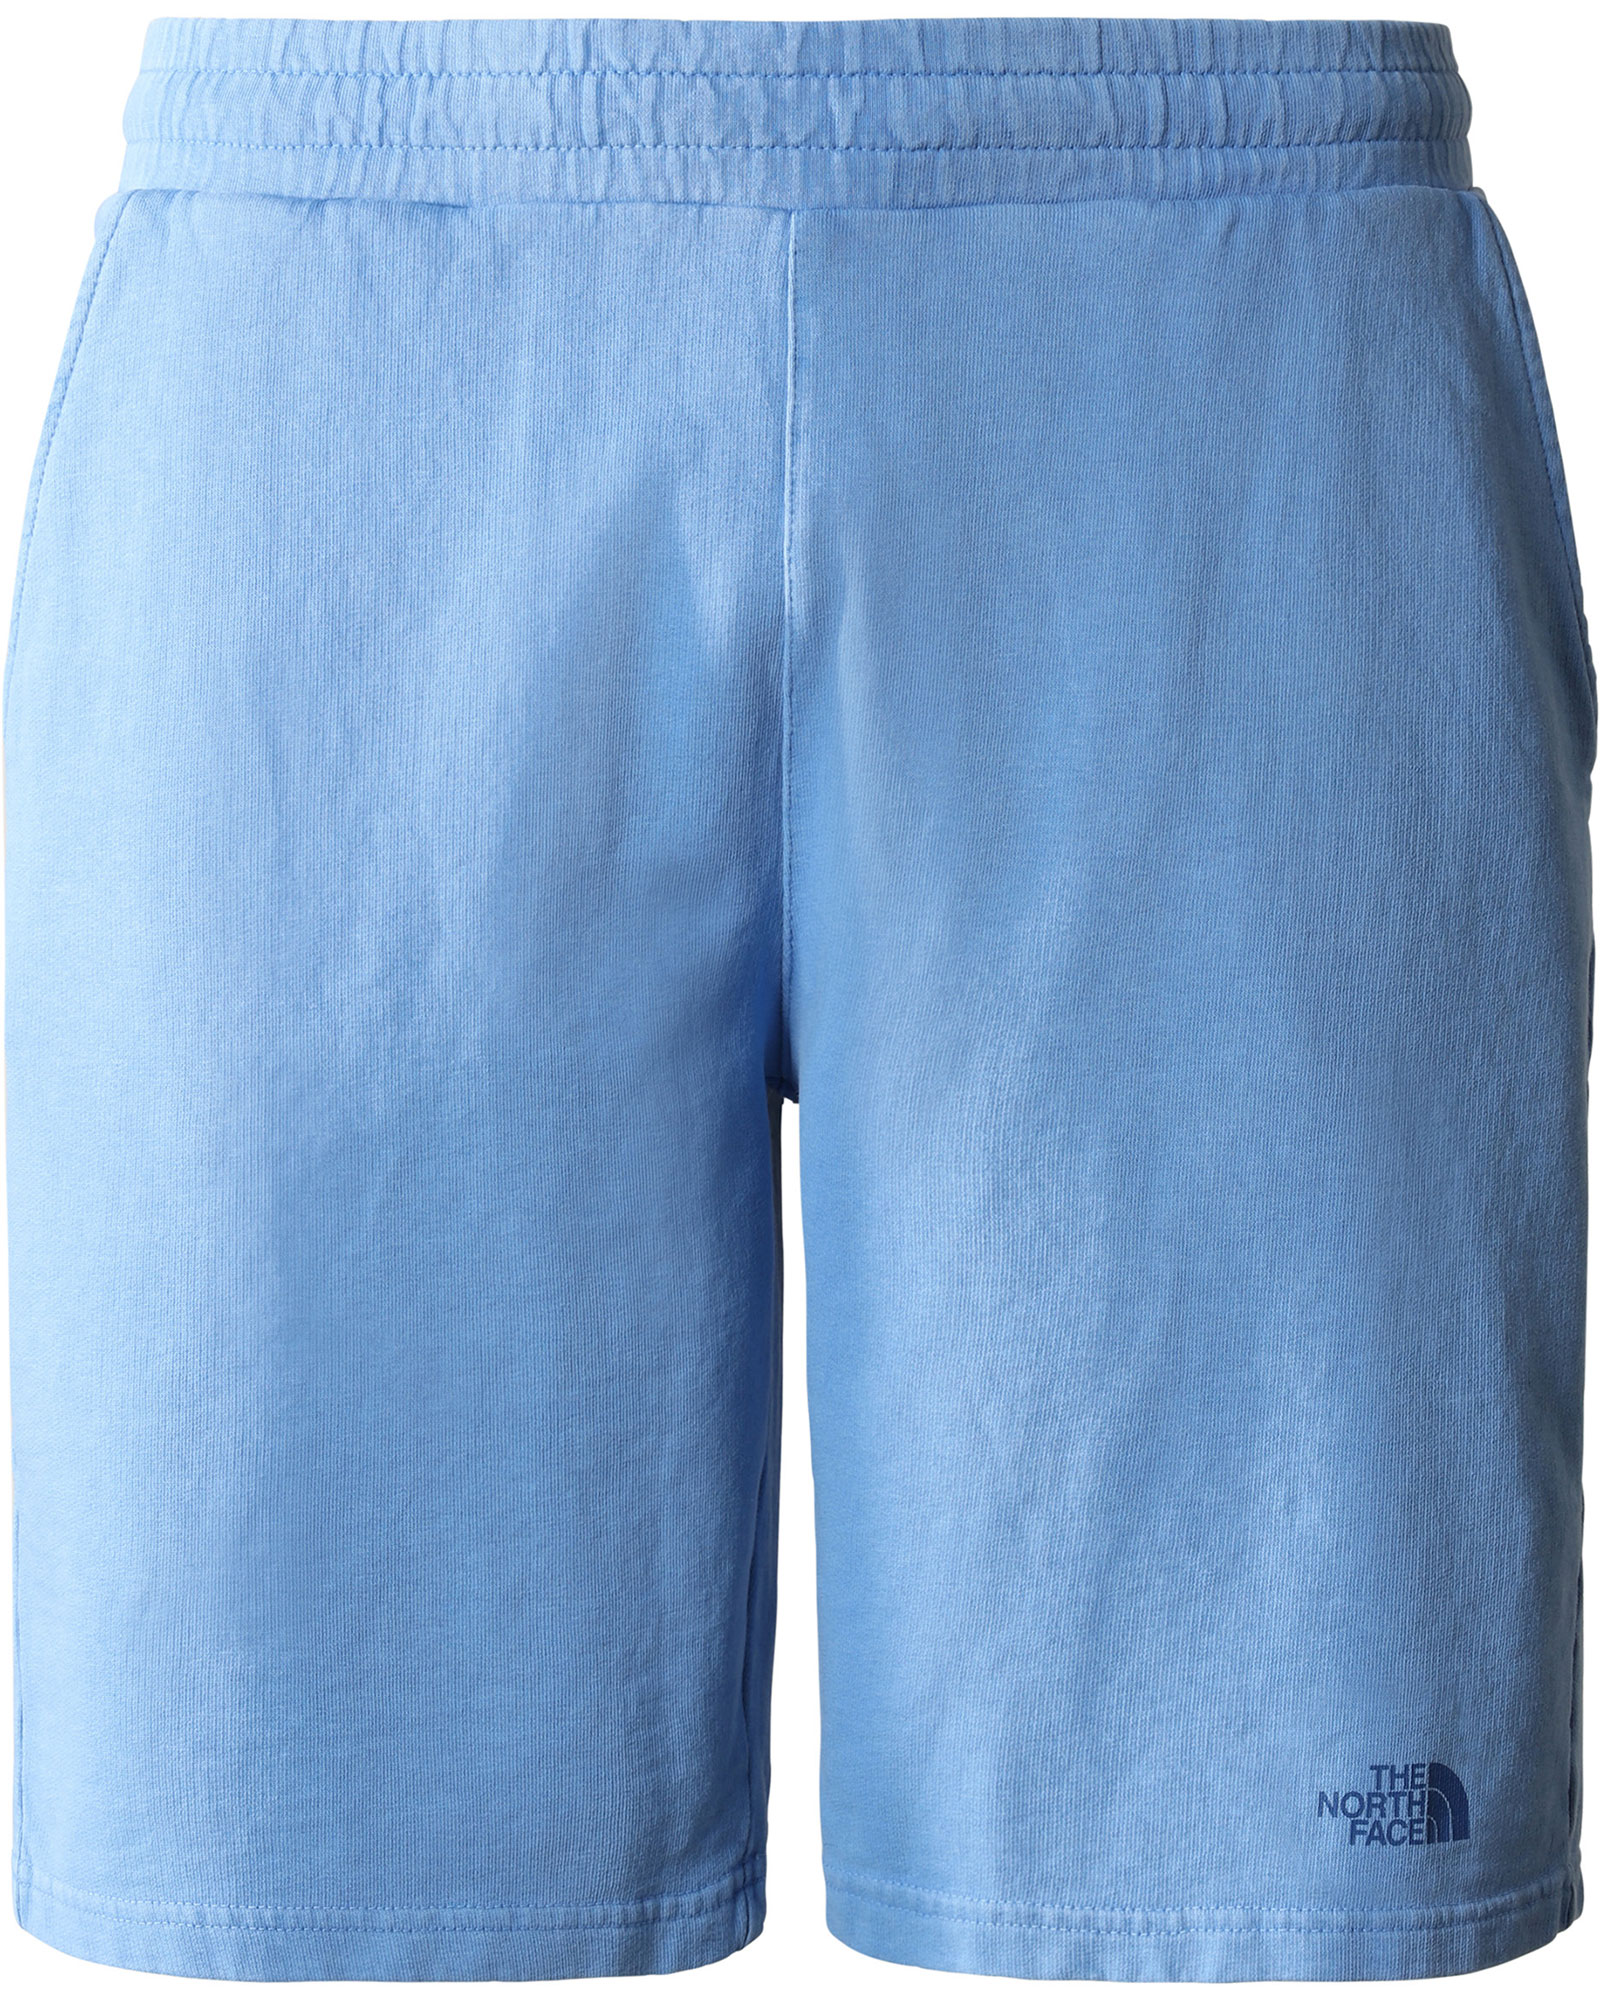 The North Face Men’s Heritage Dye Pack Shorts - Super Sonic Blue S